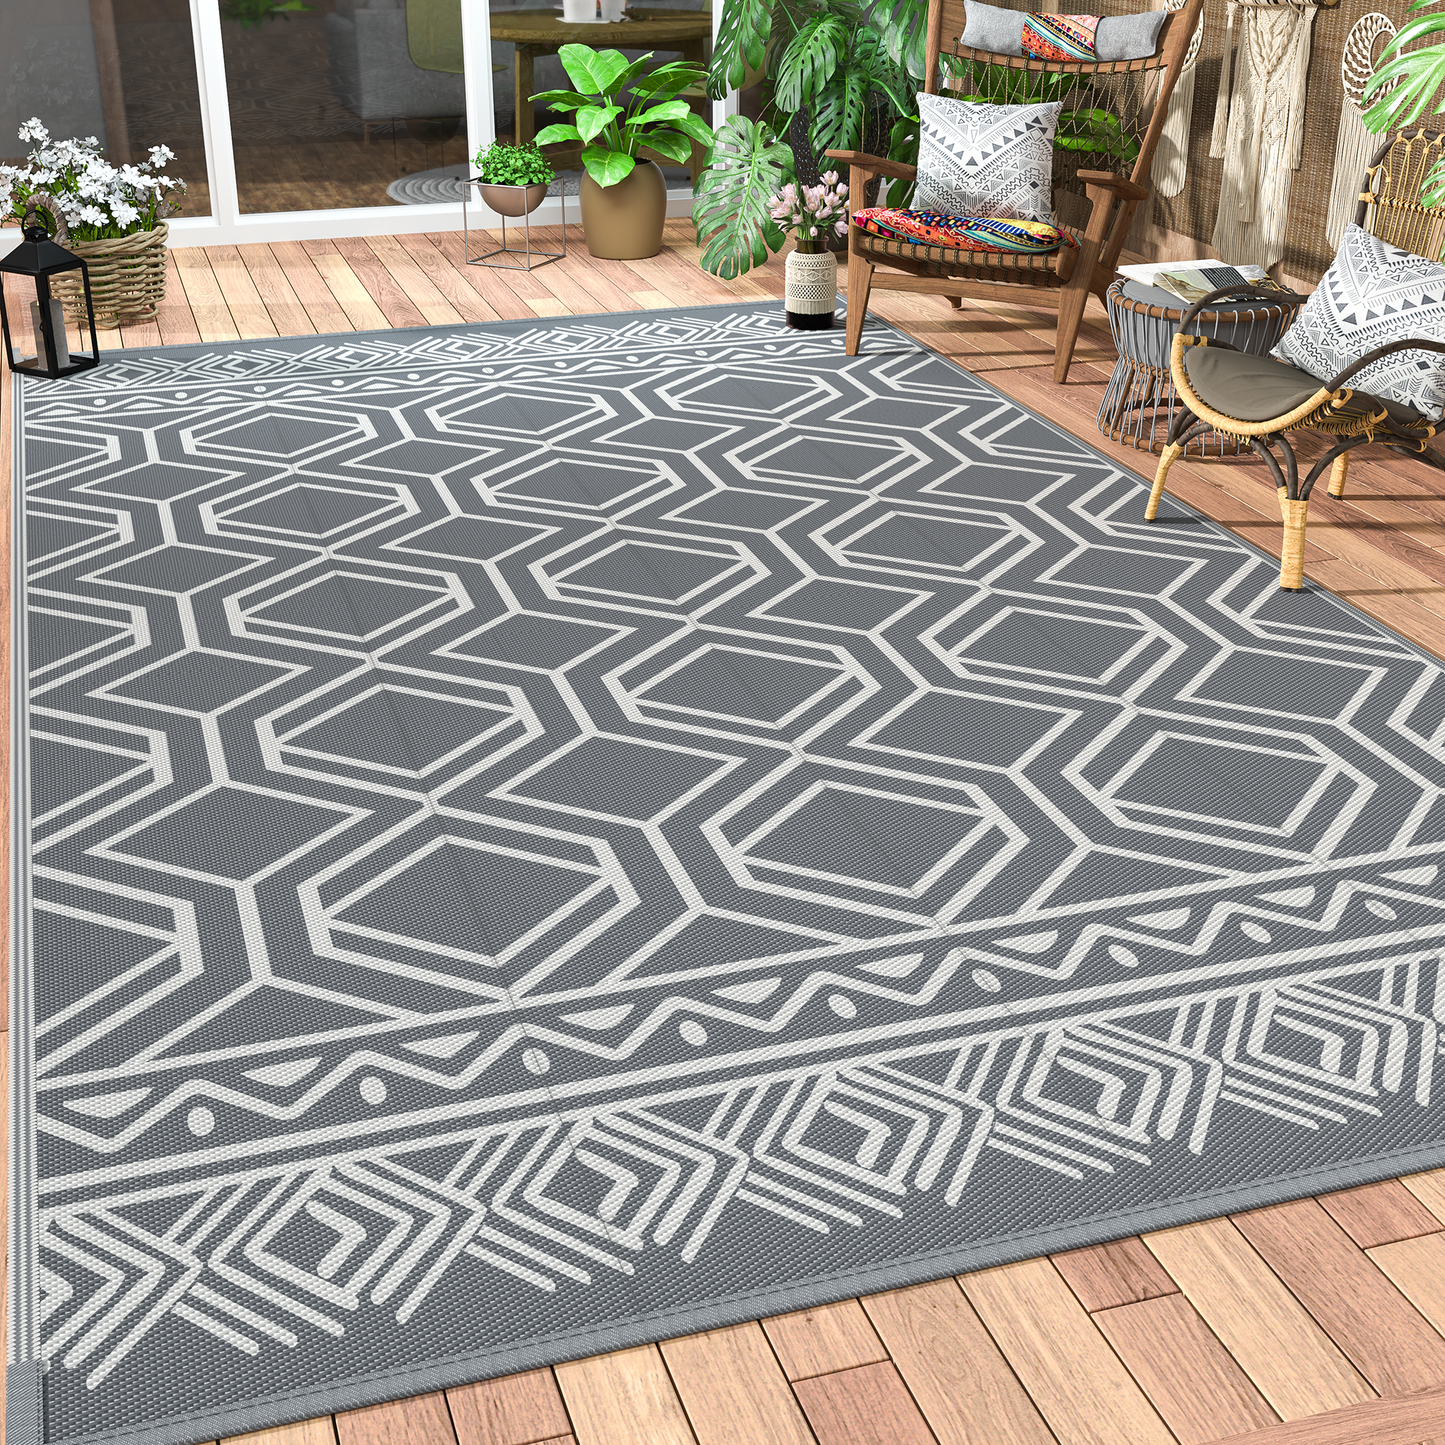 GENIMO Boho Outdoor Rug Waterproof for Patio Clearance, Reversible Camping Mat, Outside Plastic Straw Area Rugs for Rv, Deck, Camper, Balcony, Backyard